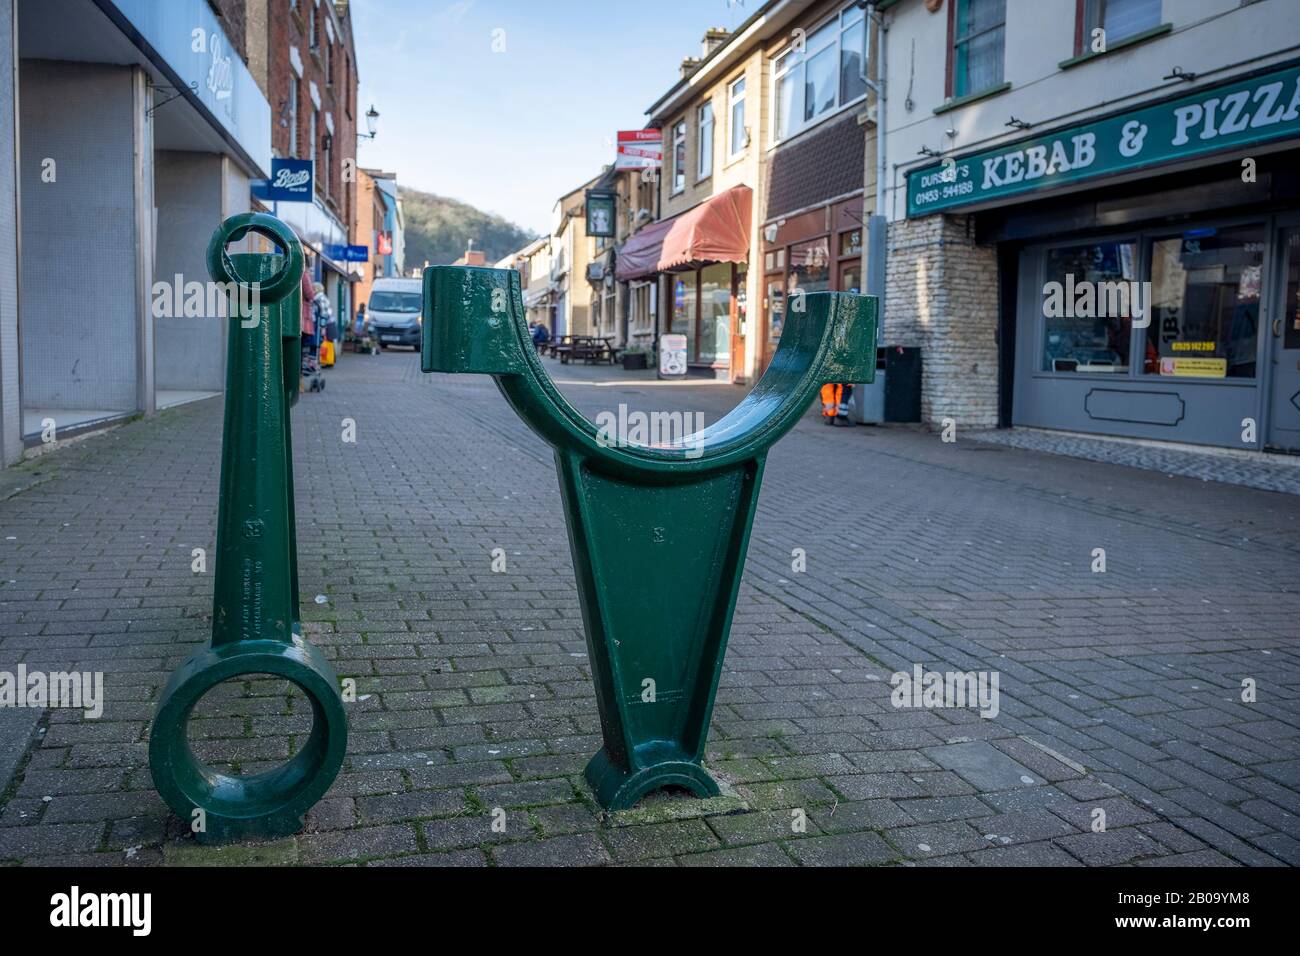 Street furniture in Dursley Gloucestershire is of larger than life castings of engine parts as made by the Lister Engine company in the town. Stock Photo